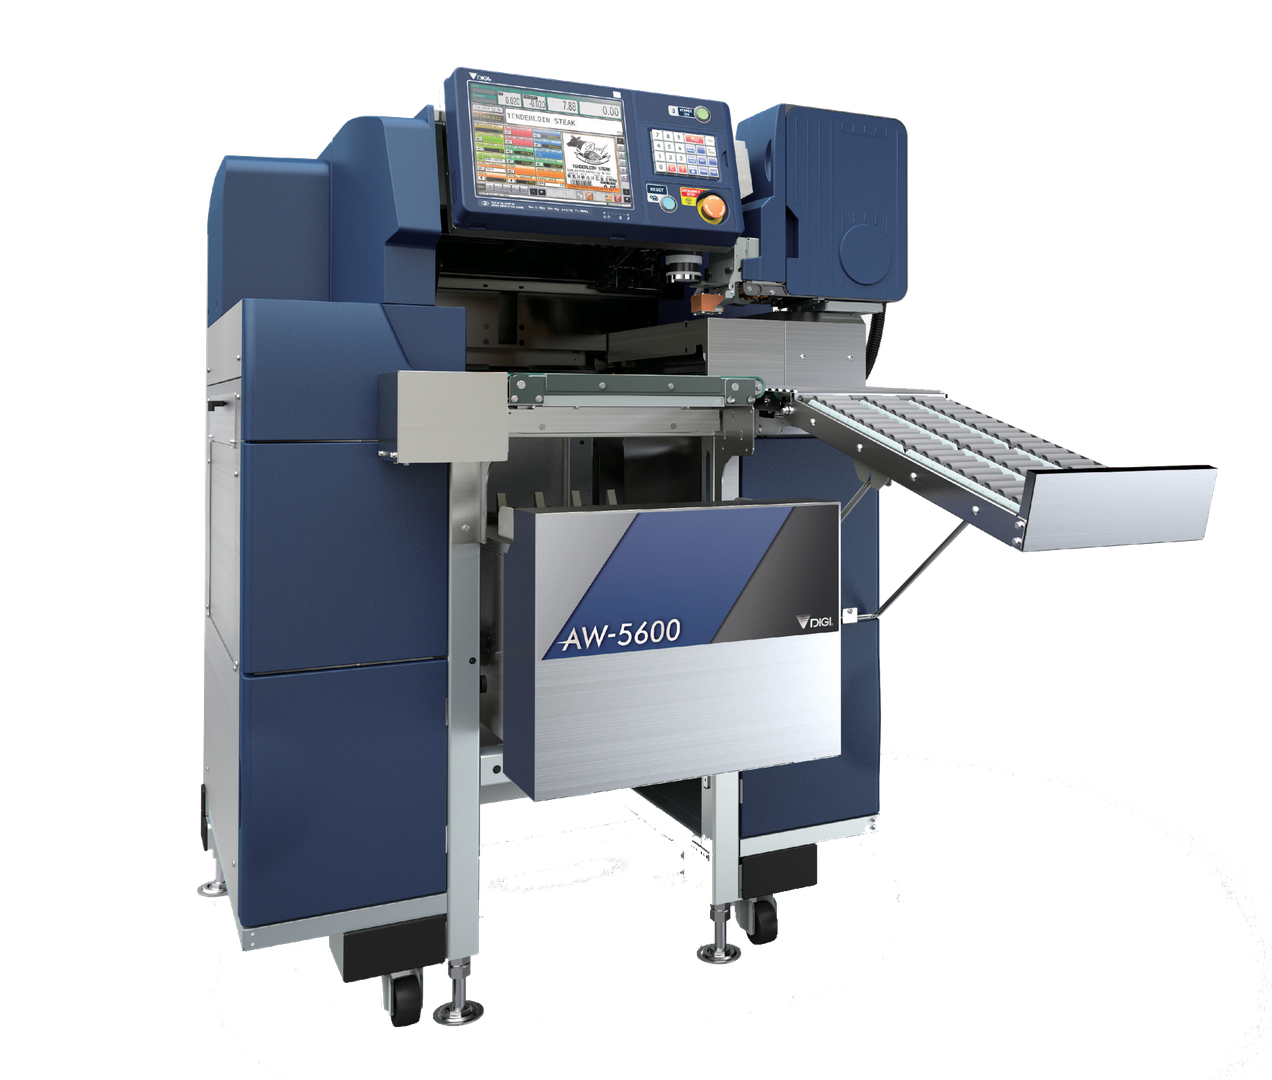 DIGI AW-5600 AT , automatic weigher-wrapper-labeler combines high speed and dynamic film stretching for a superior backroom operation.  Featuring an advanced super stretch system, 10.4 inch touch screen display, 80mm thermal head for printing and network capability. Optional Twin Labeler, Bottom Labeler, and POP Labeler are available.